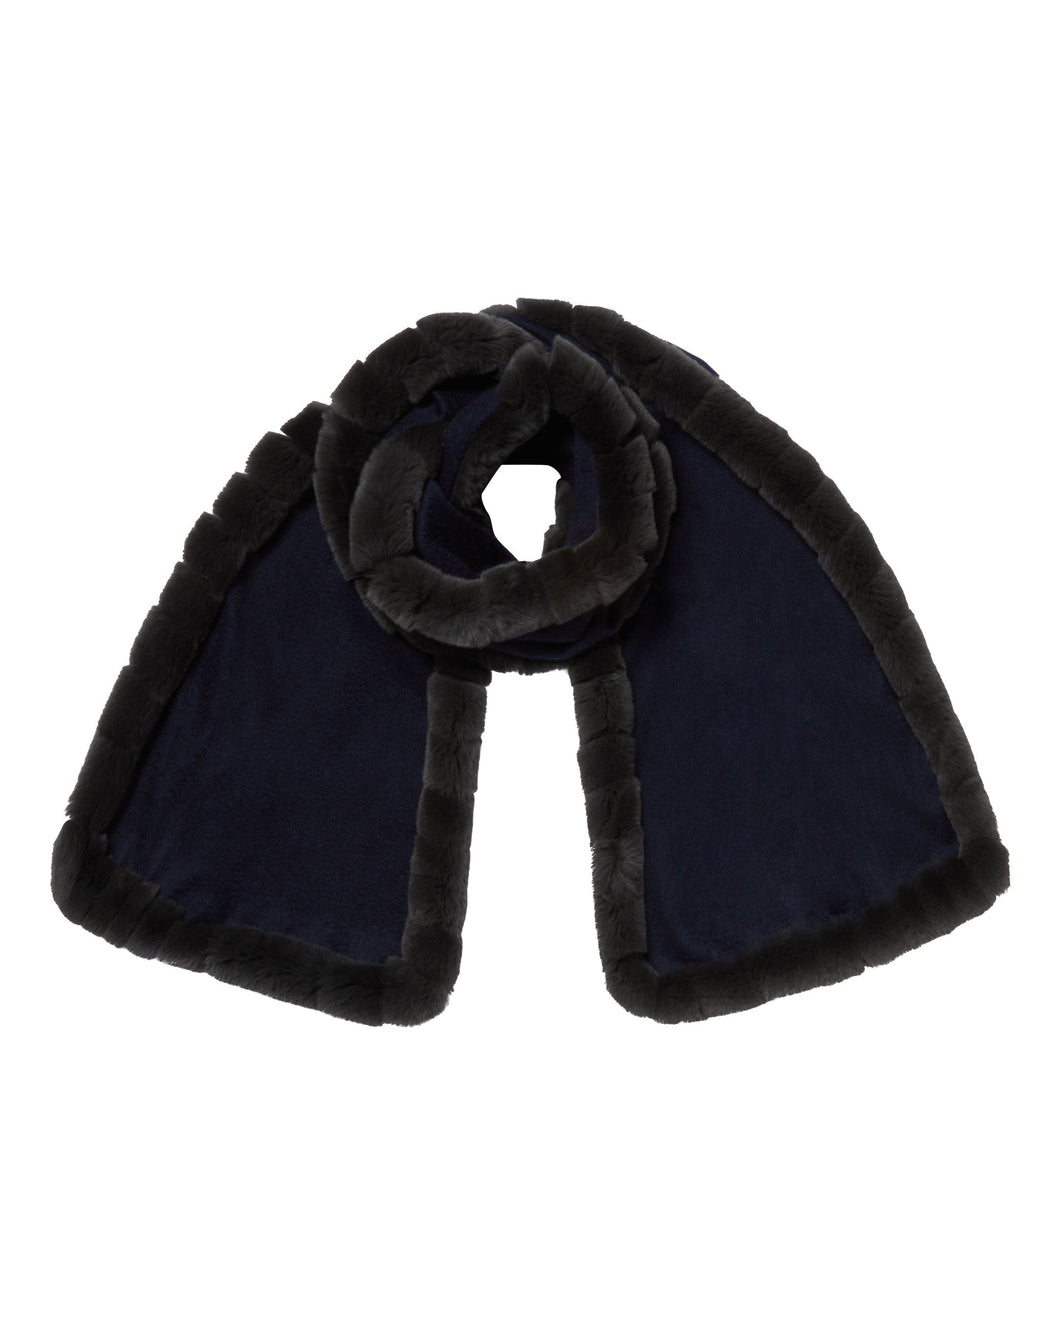 N.Peal Women's Cashmere Scarf With Fur Trim Navy Blue